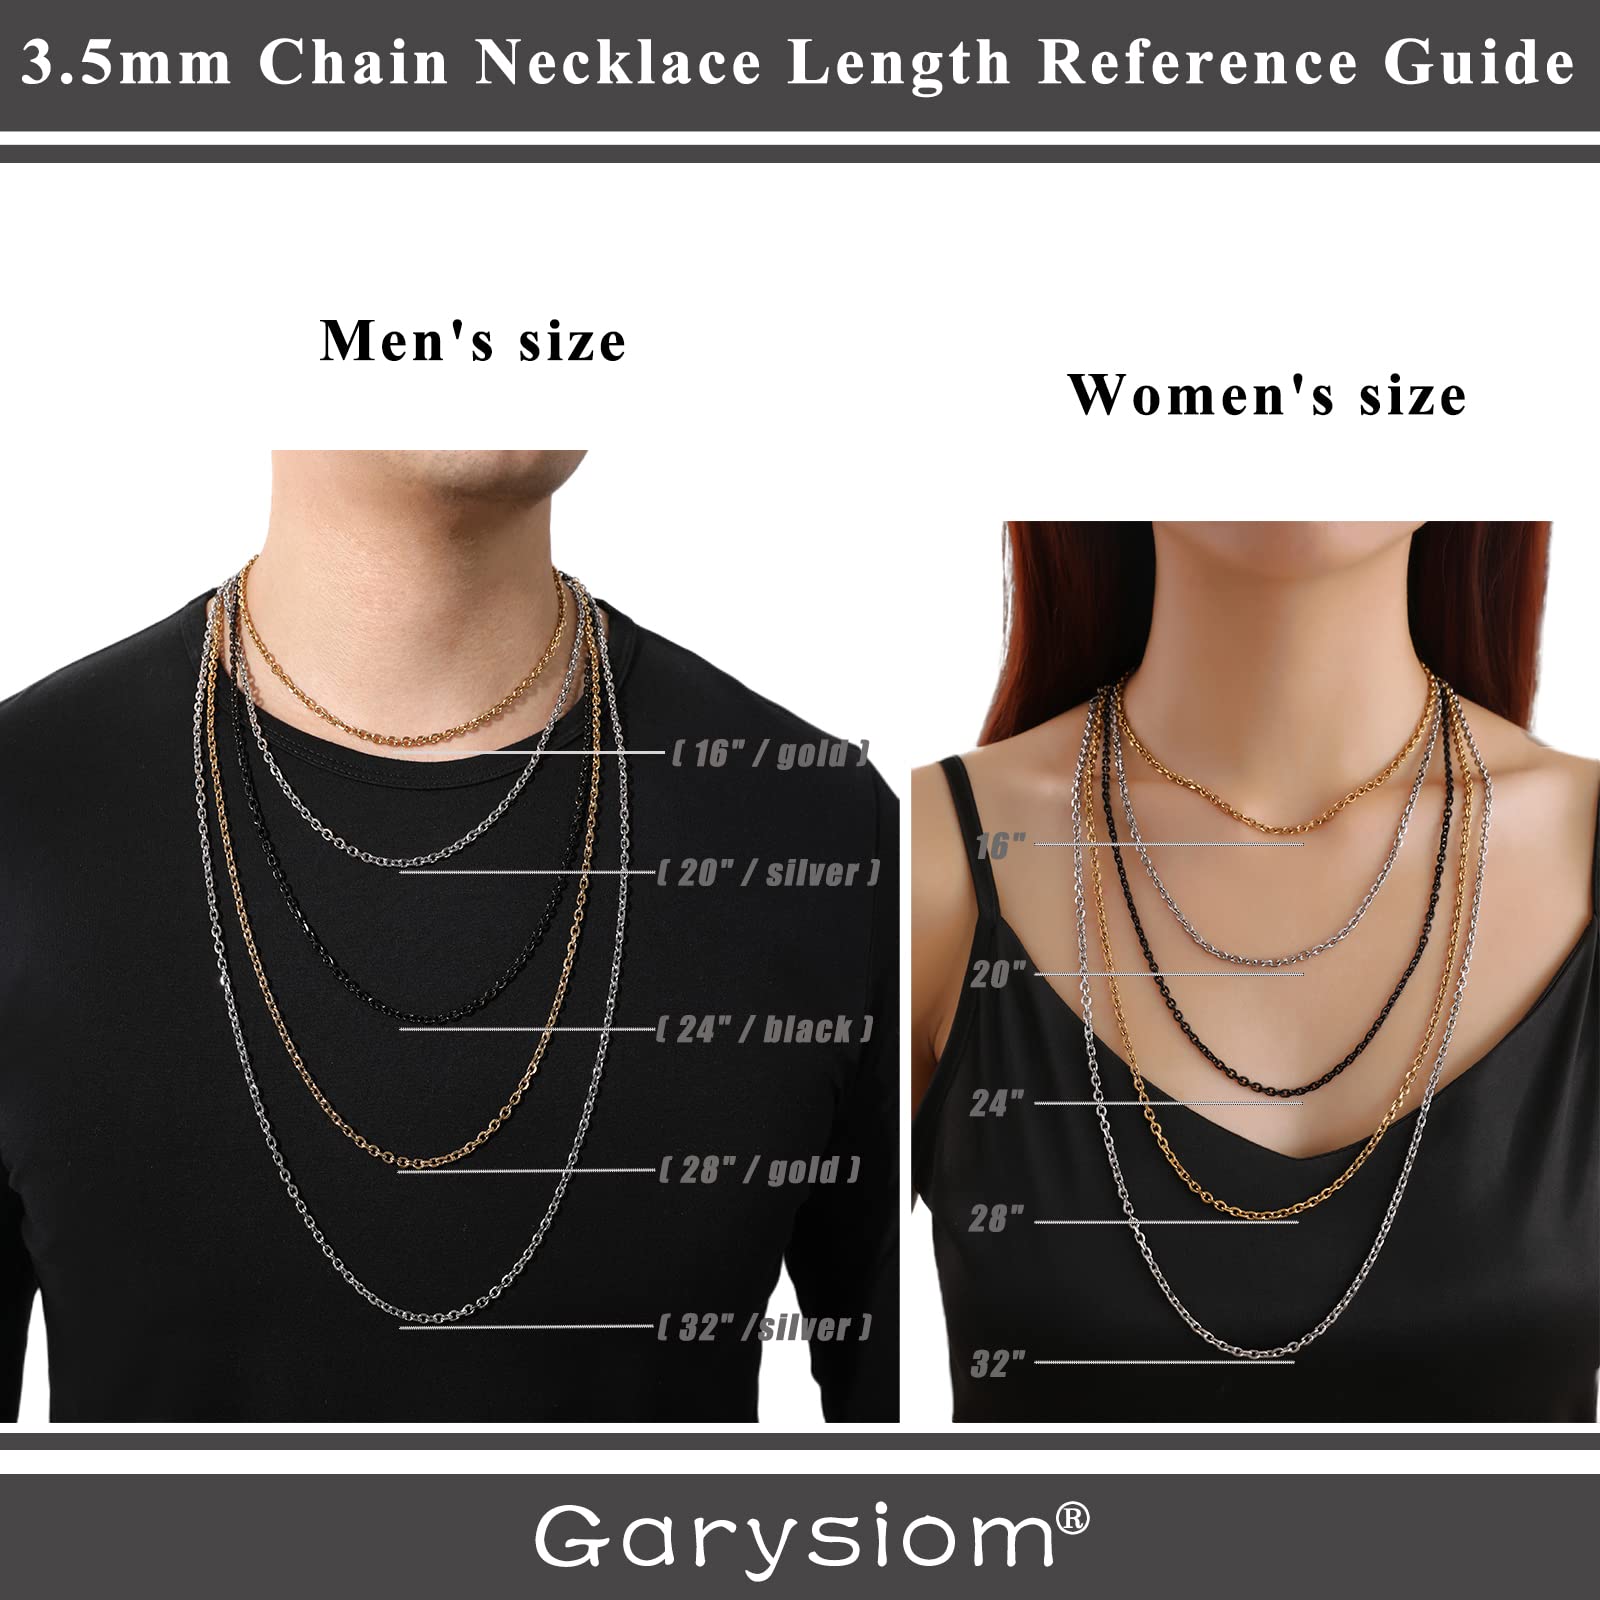 3 Pcs Stainless Steel Chain Necklaces for Men & Women, Silver Gold Black Cable Link Rolo Necklace Boys Fashion Jewelry Gifts, 3.5 MM 16-32 Inch